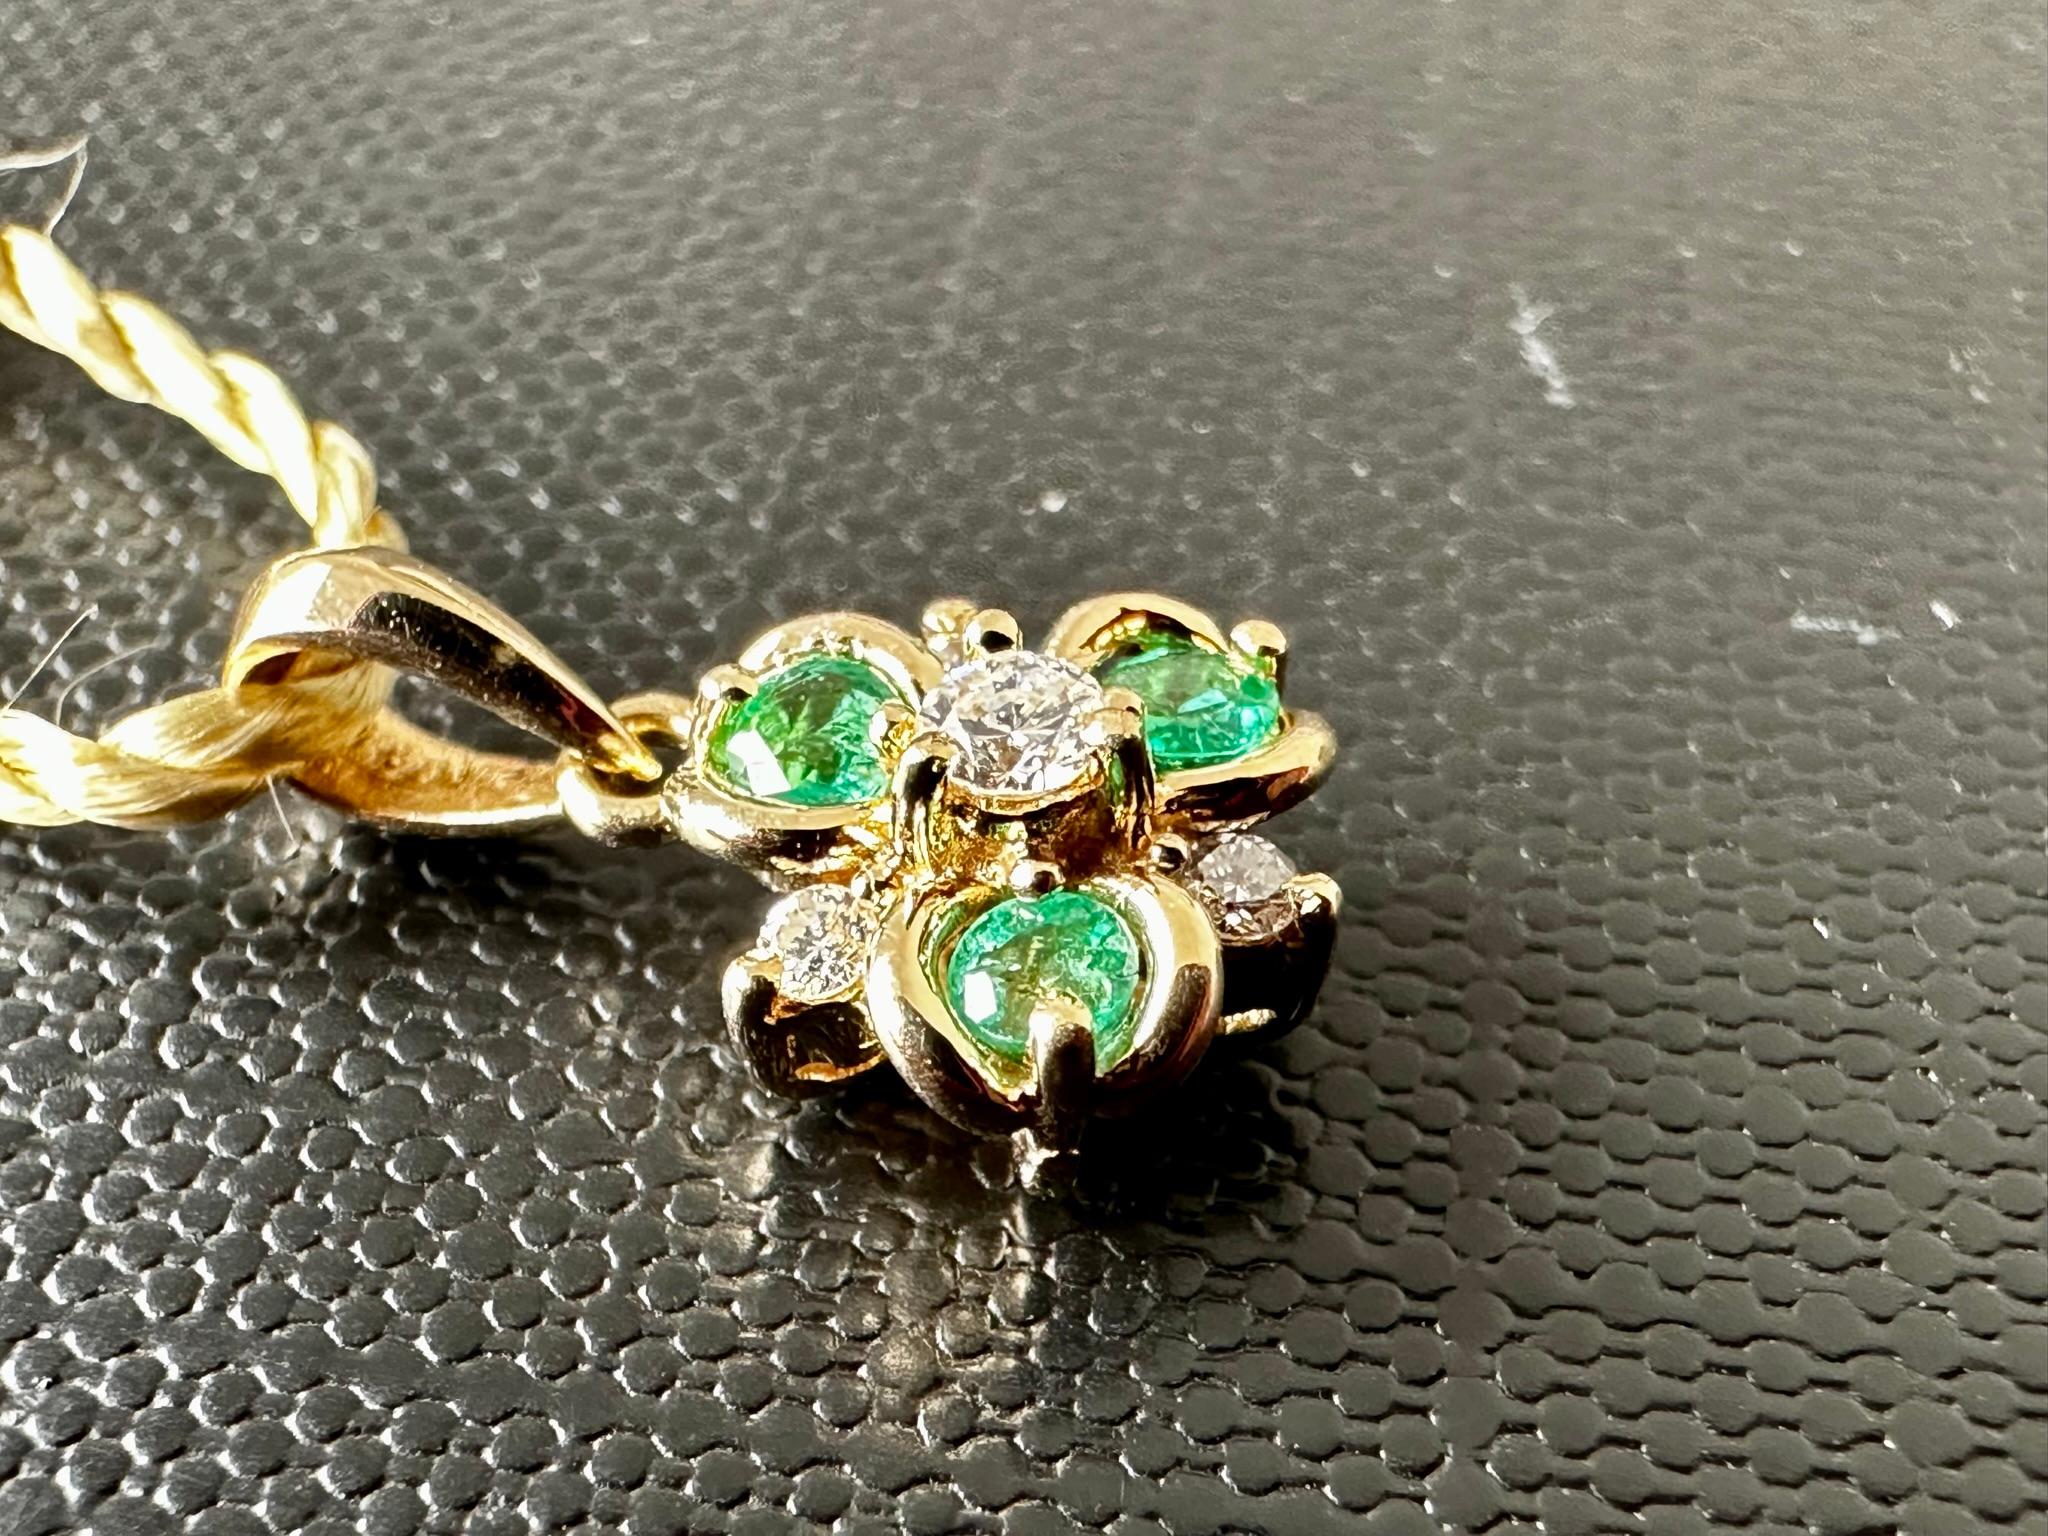 Trefoil 14kt Yellow Gold Pendant with Diamonds and Emeralds In Good Condition For Sale In Esch-Sur-Alzette, LU